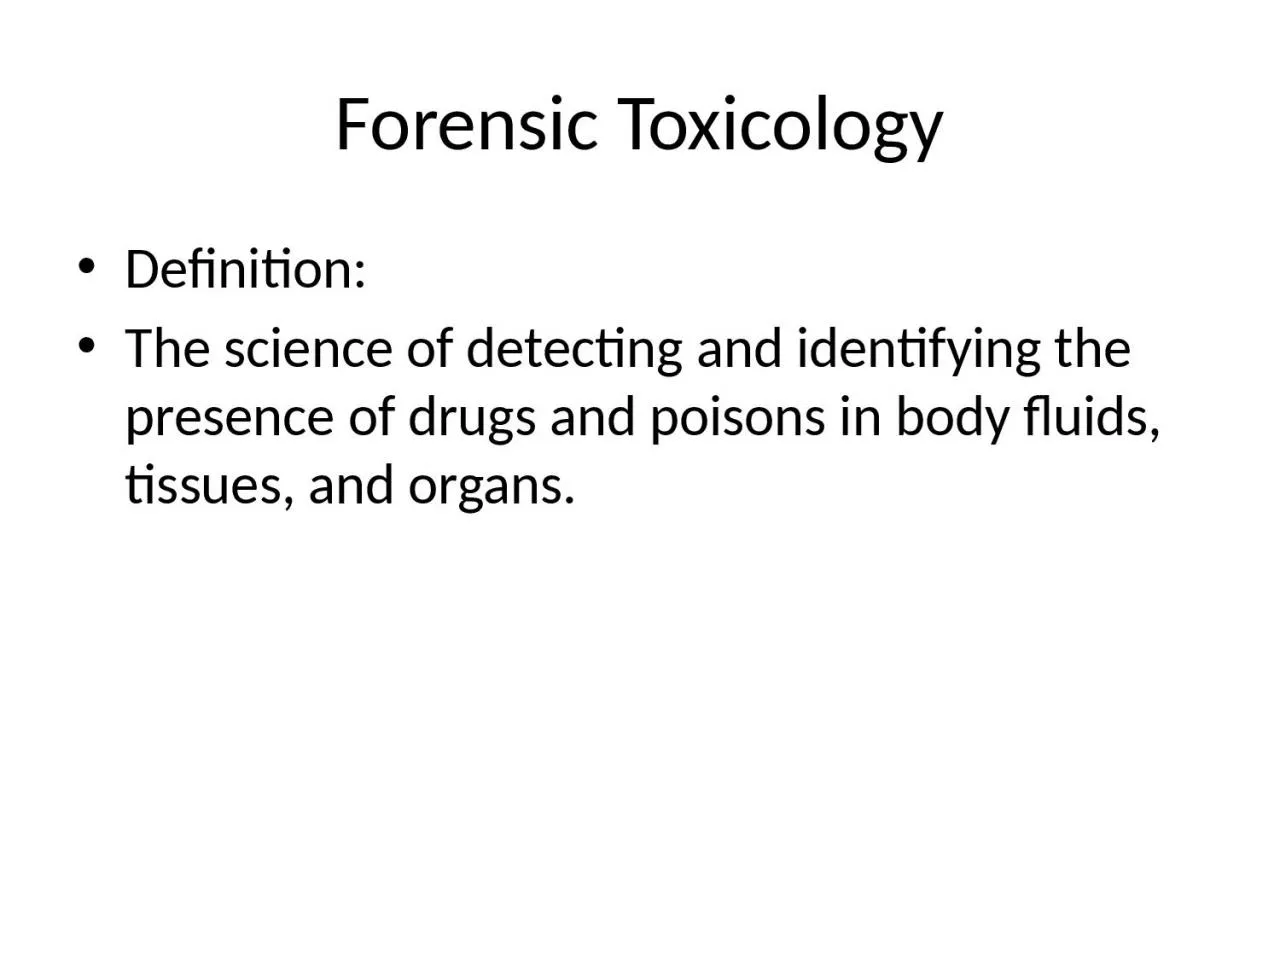 Forensic Toxicology Definition: